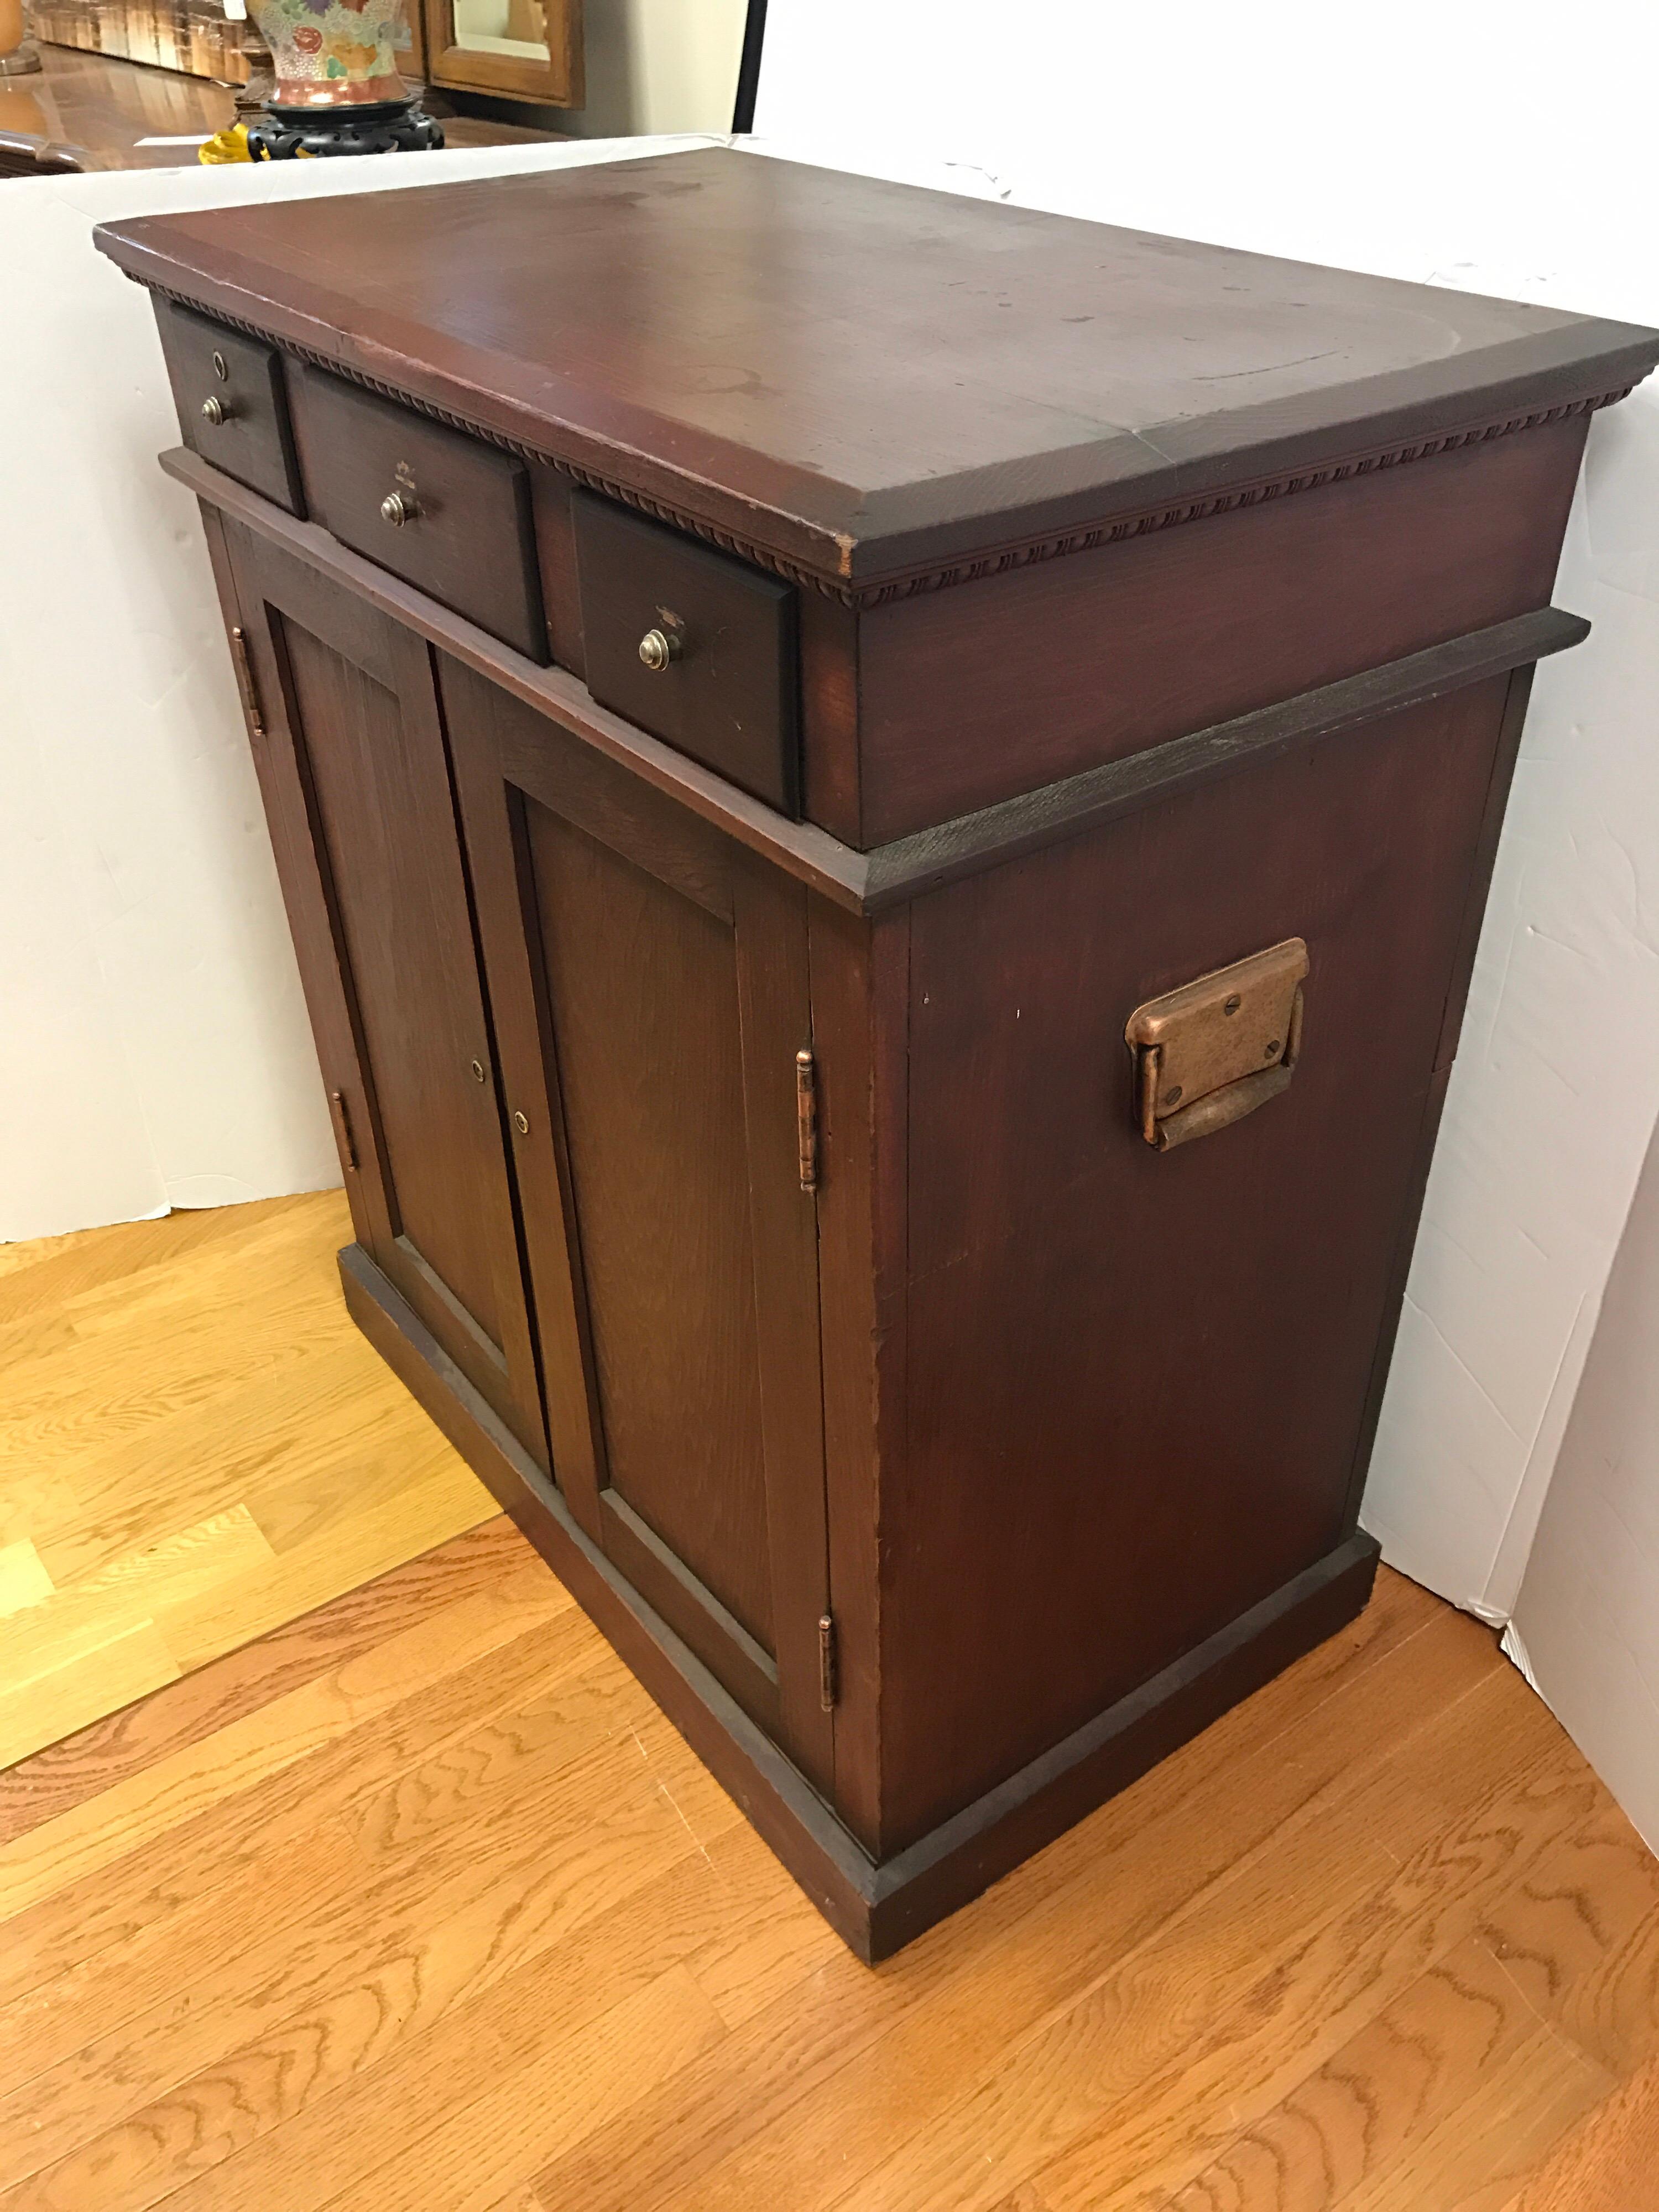 From the turn of the century, this industrial flat map oak file cabinet holds a lot of history. Comes with casters if needed for ease of movement as it heavy as you can imagine.